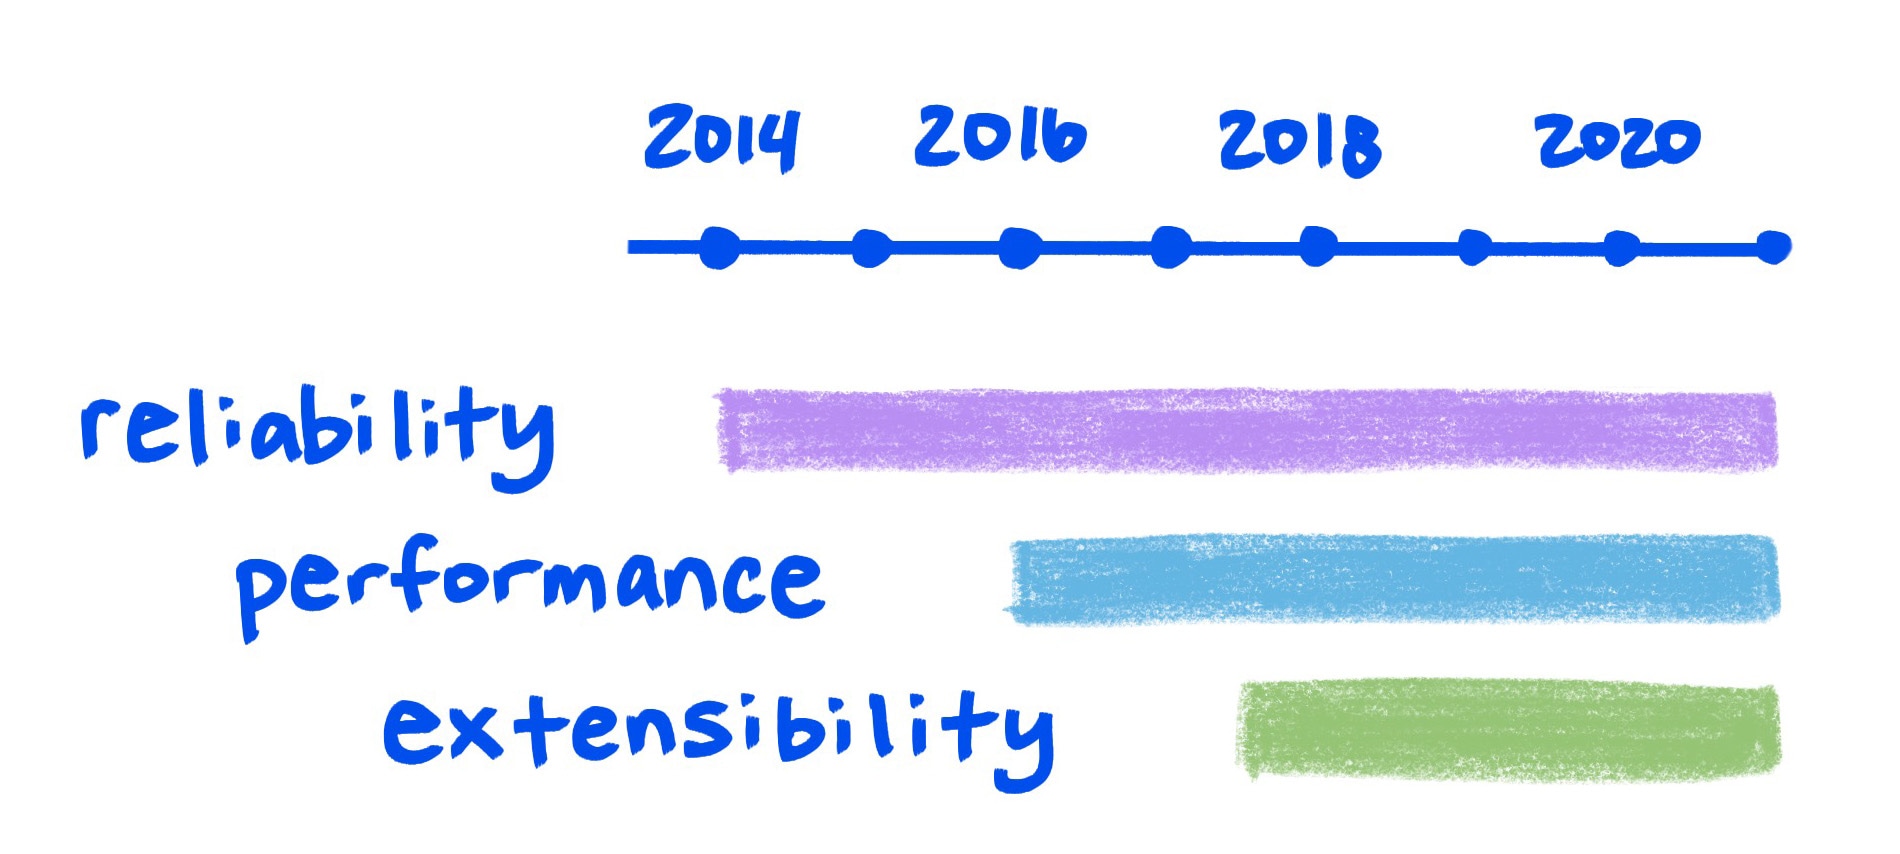 Sketch graph shows reliability, performance, and extensibility improving over time